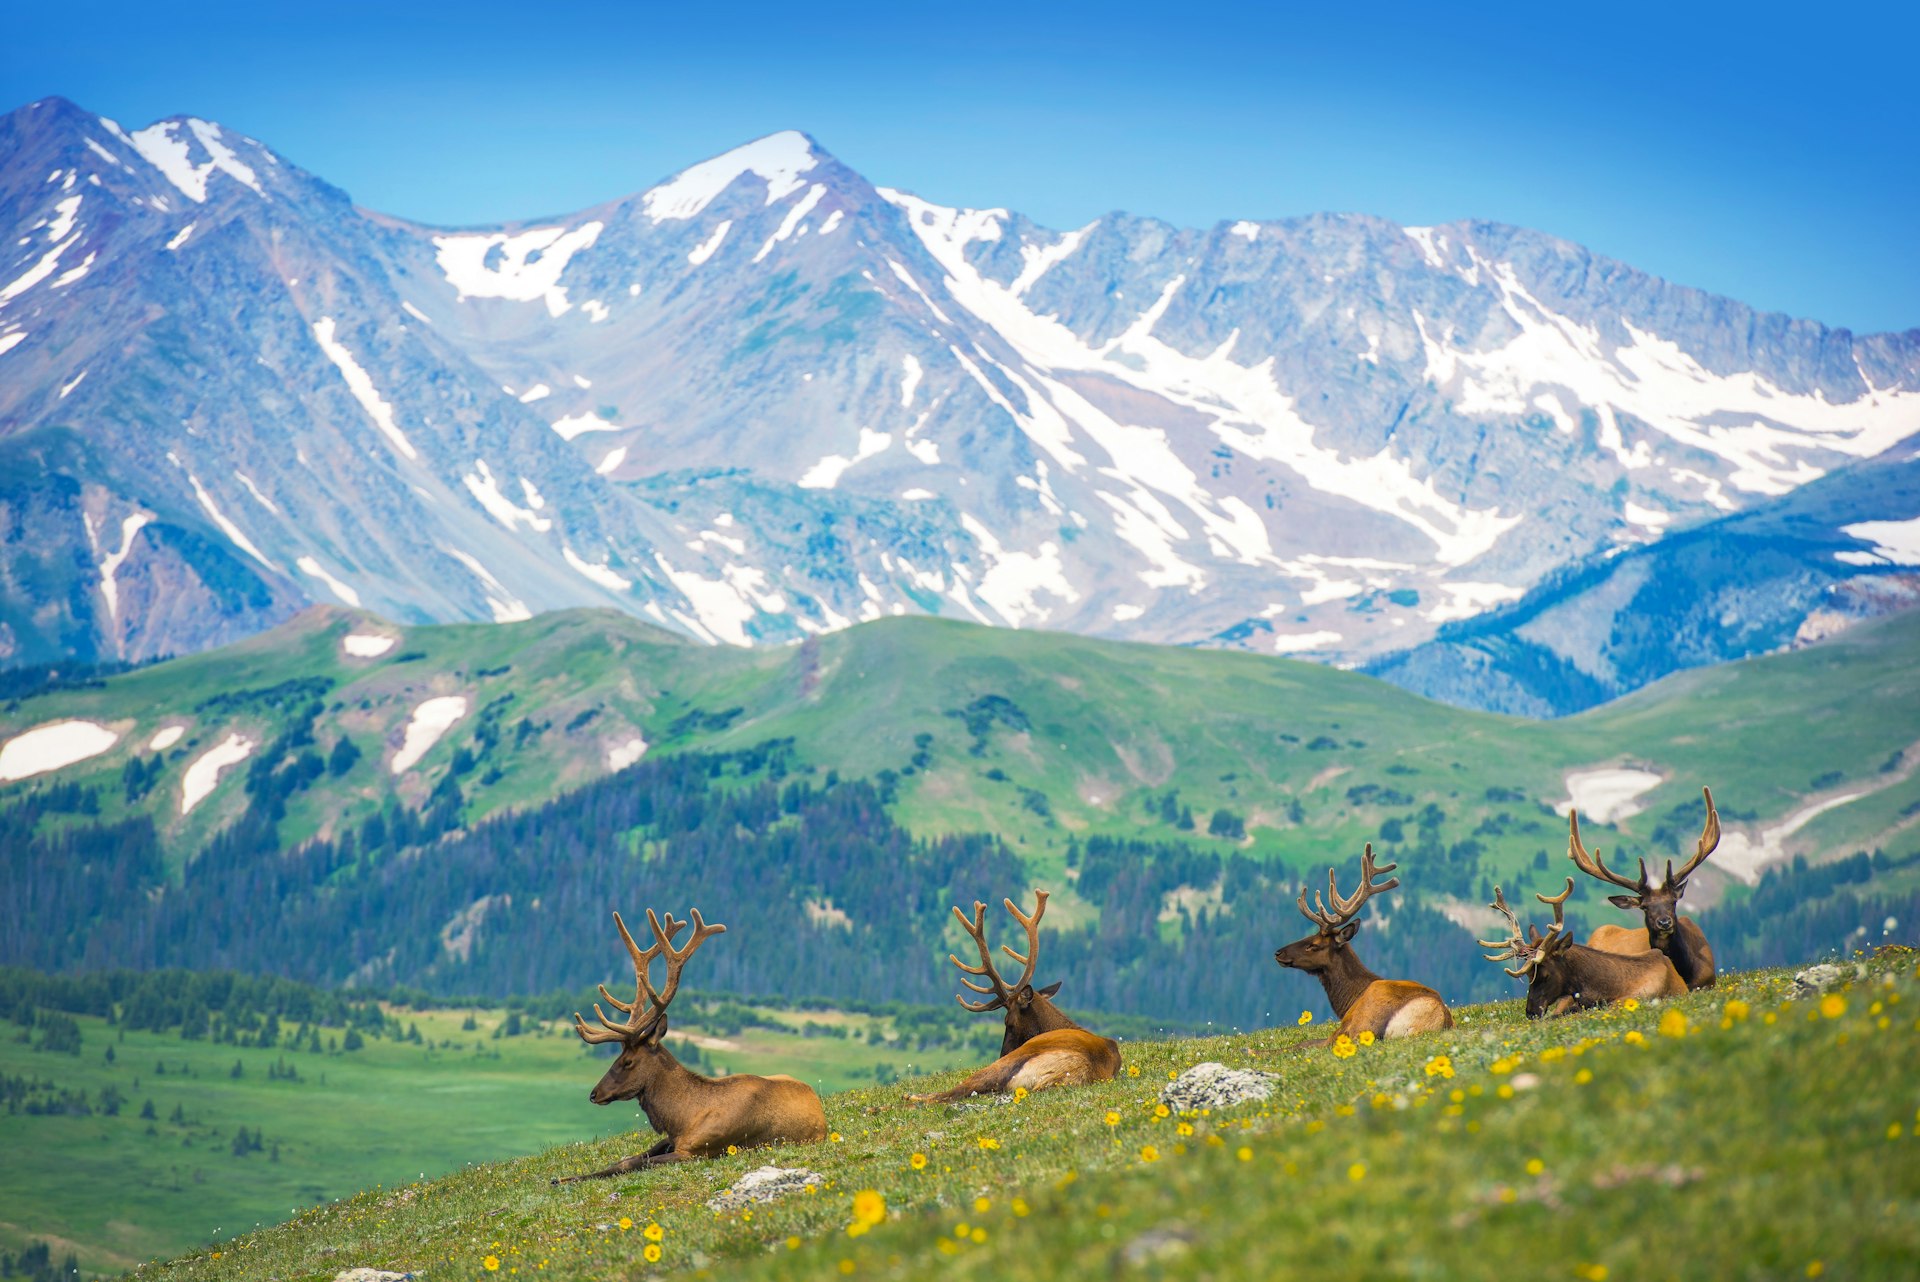 North American elks resting in a Rocky Mountain meadow in Colorado, United States.